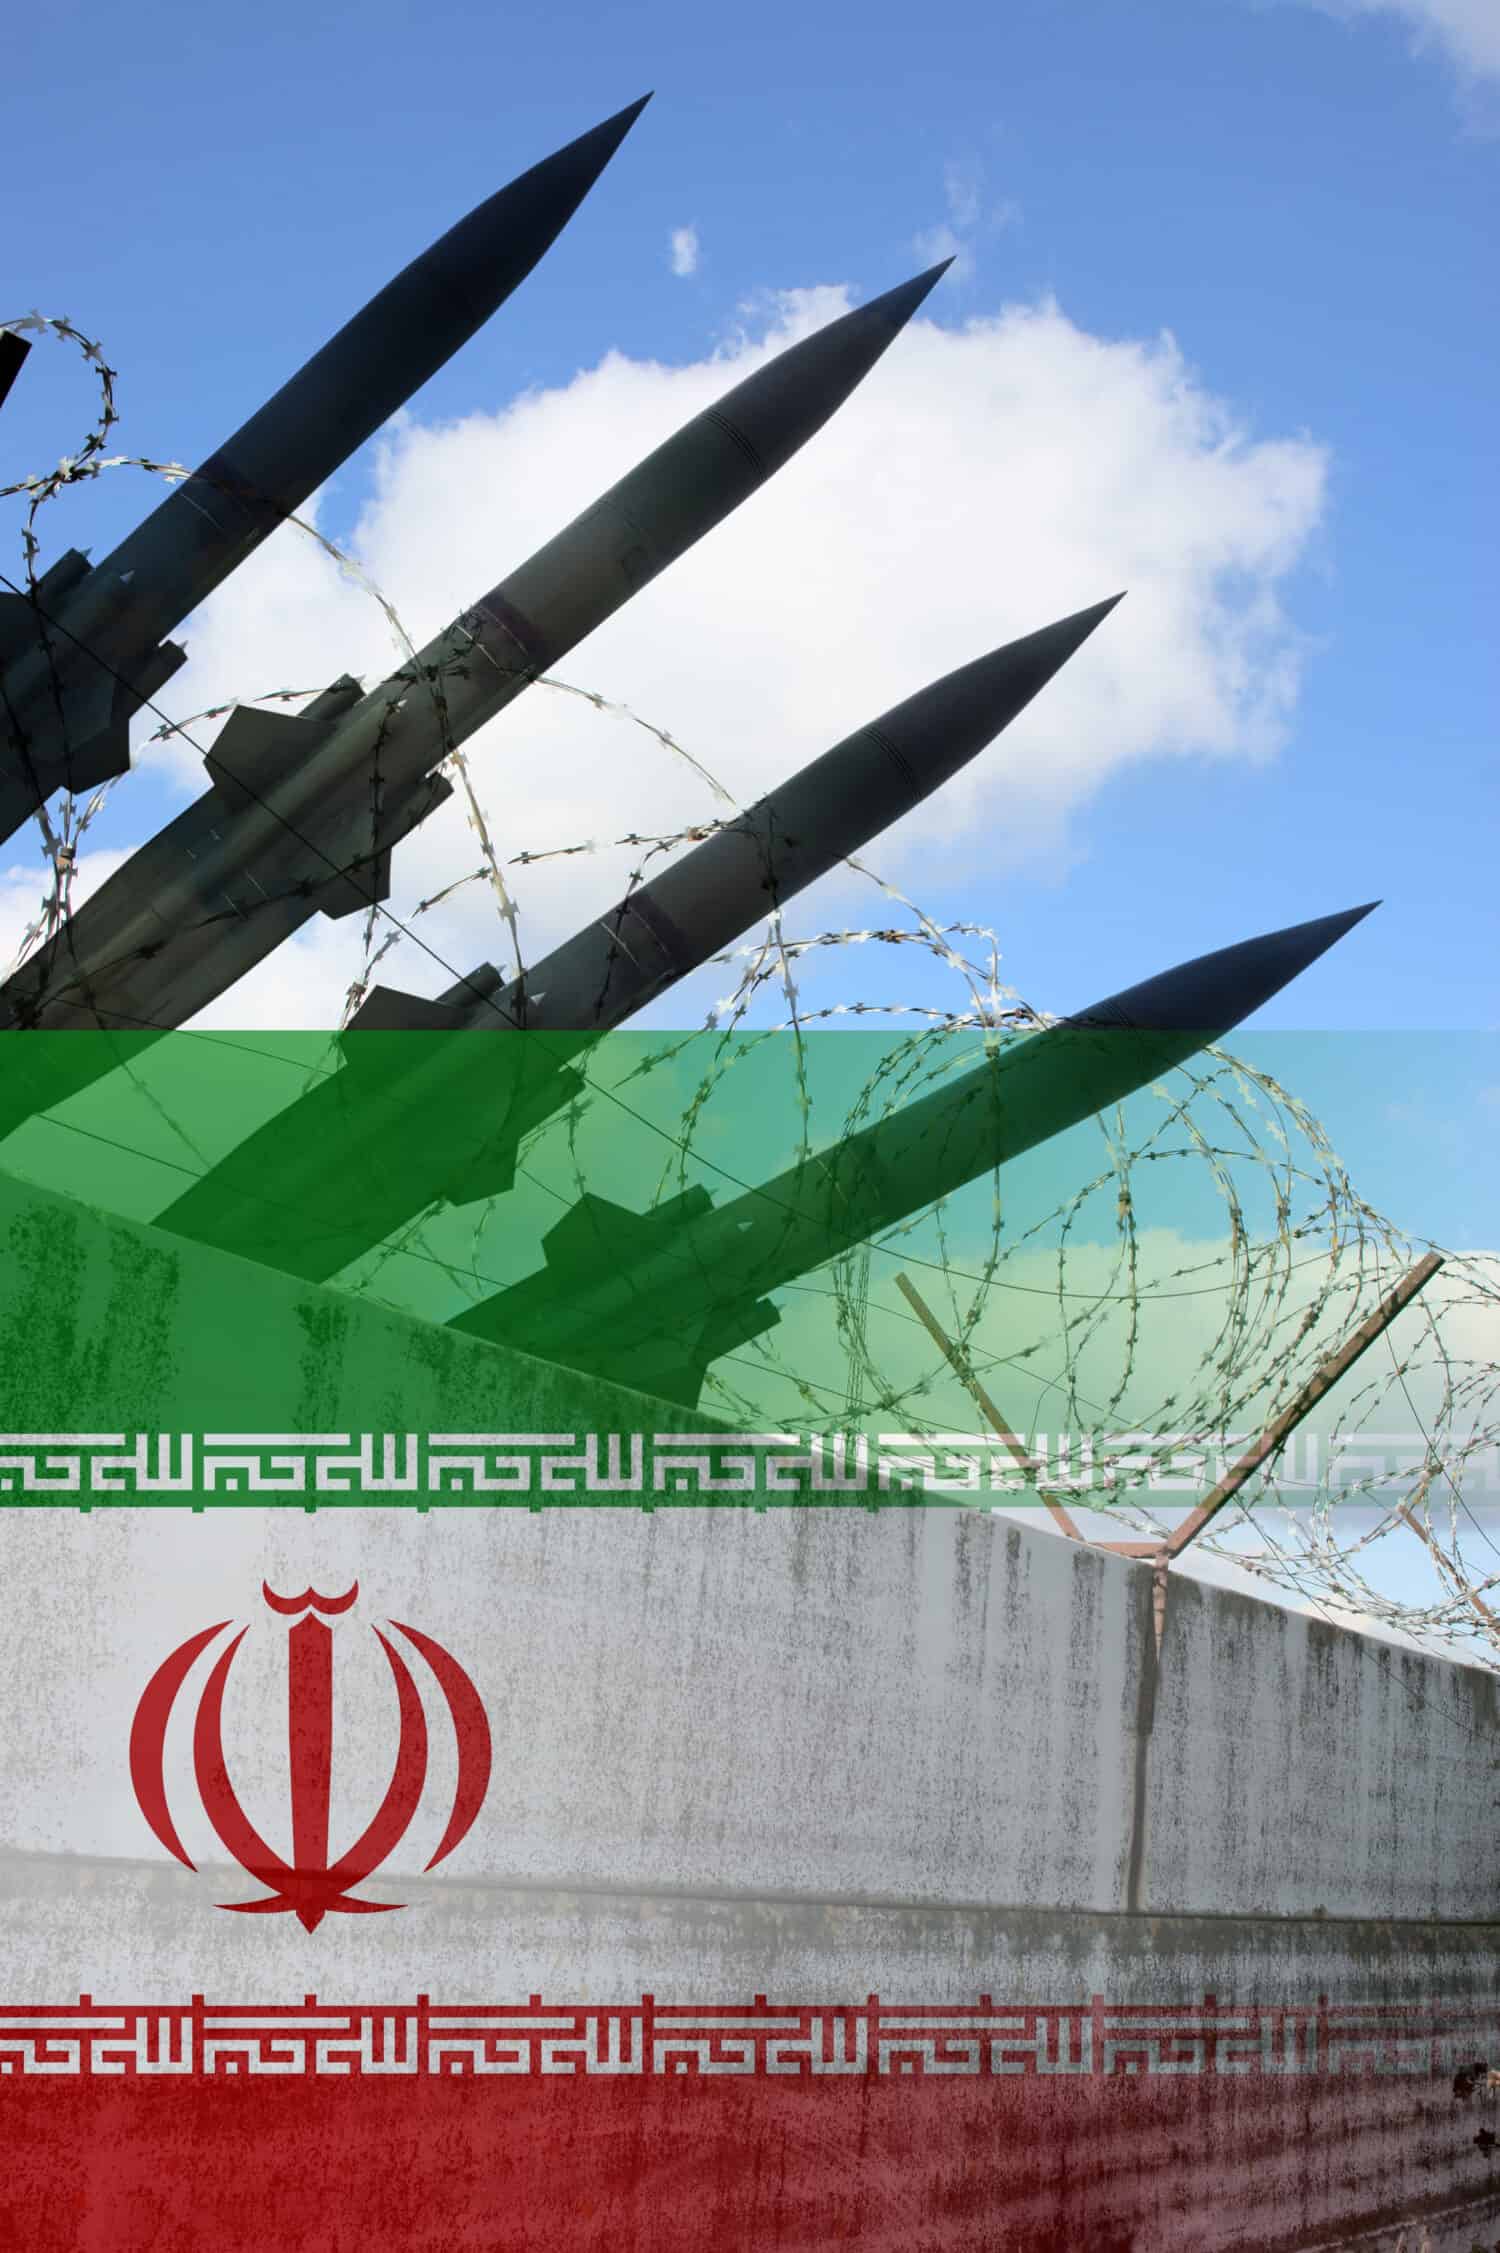 Military rockets, wall with barbwire and Iran national flag